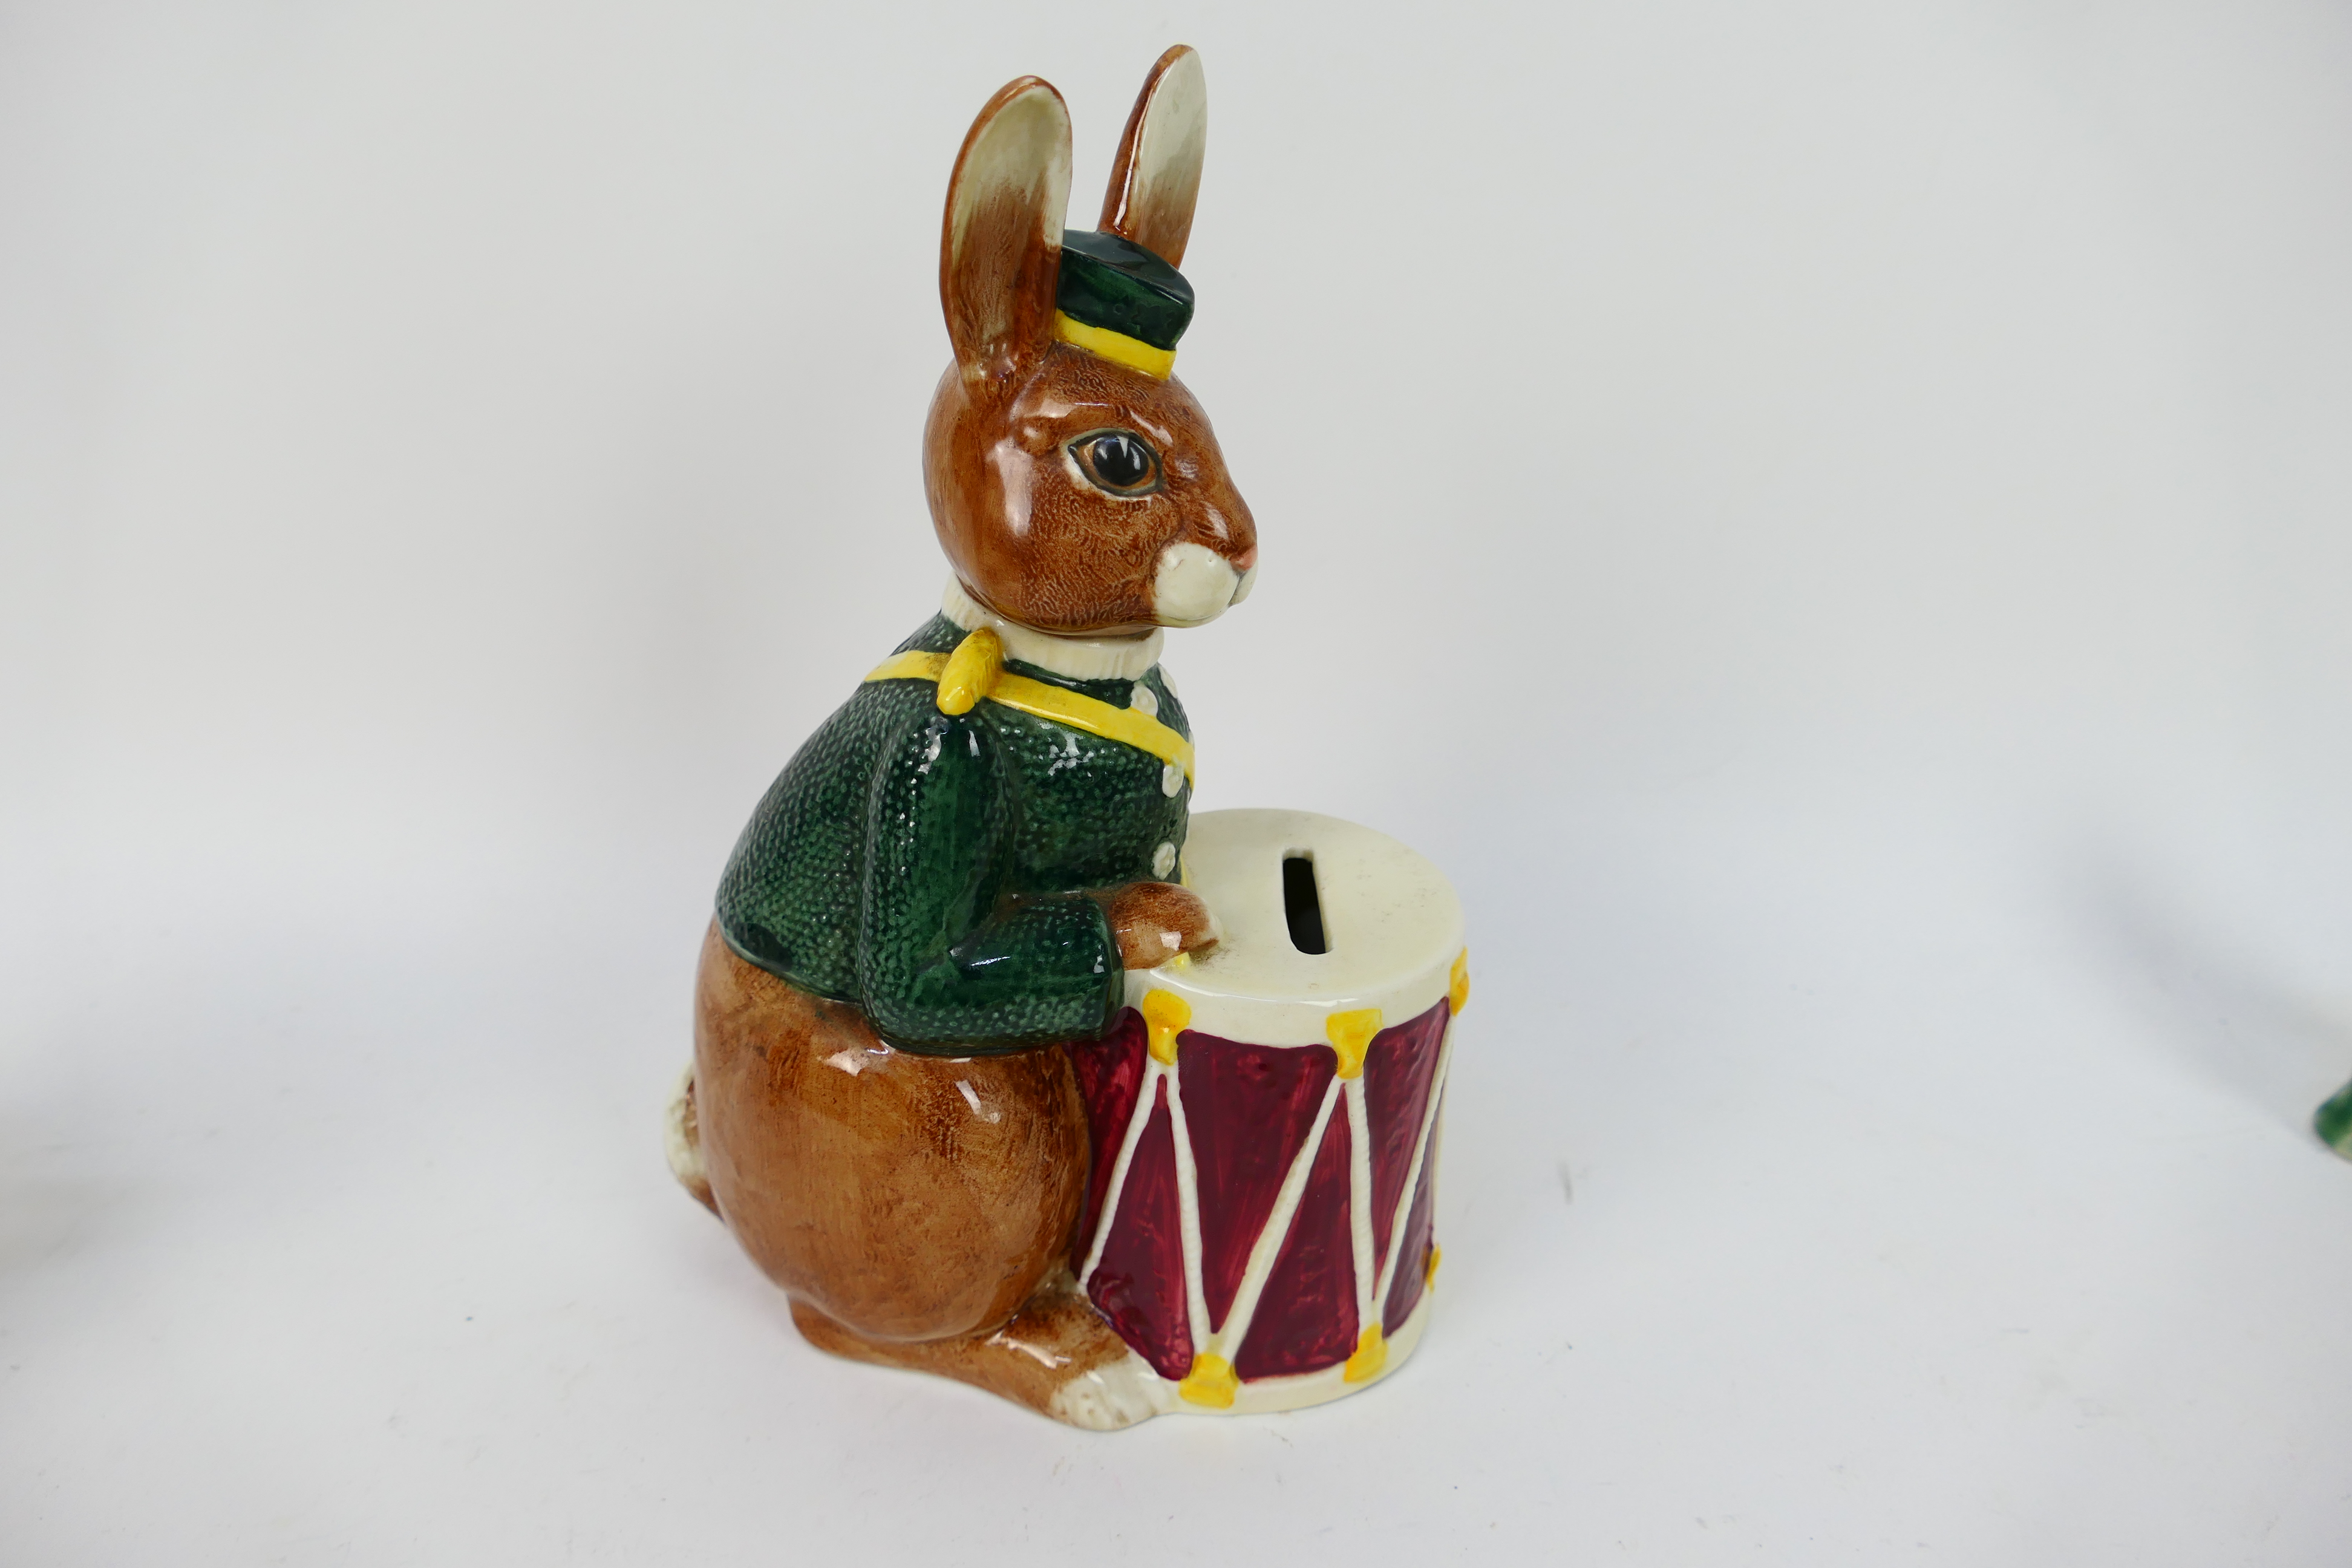 Lot to include A Royal Doulton Bunnybank # D6615, approximately 21 cm (h), - Image 5 of 5